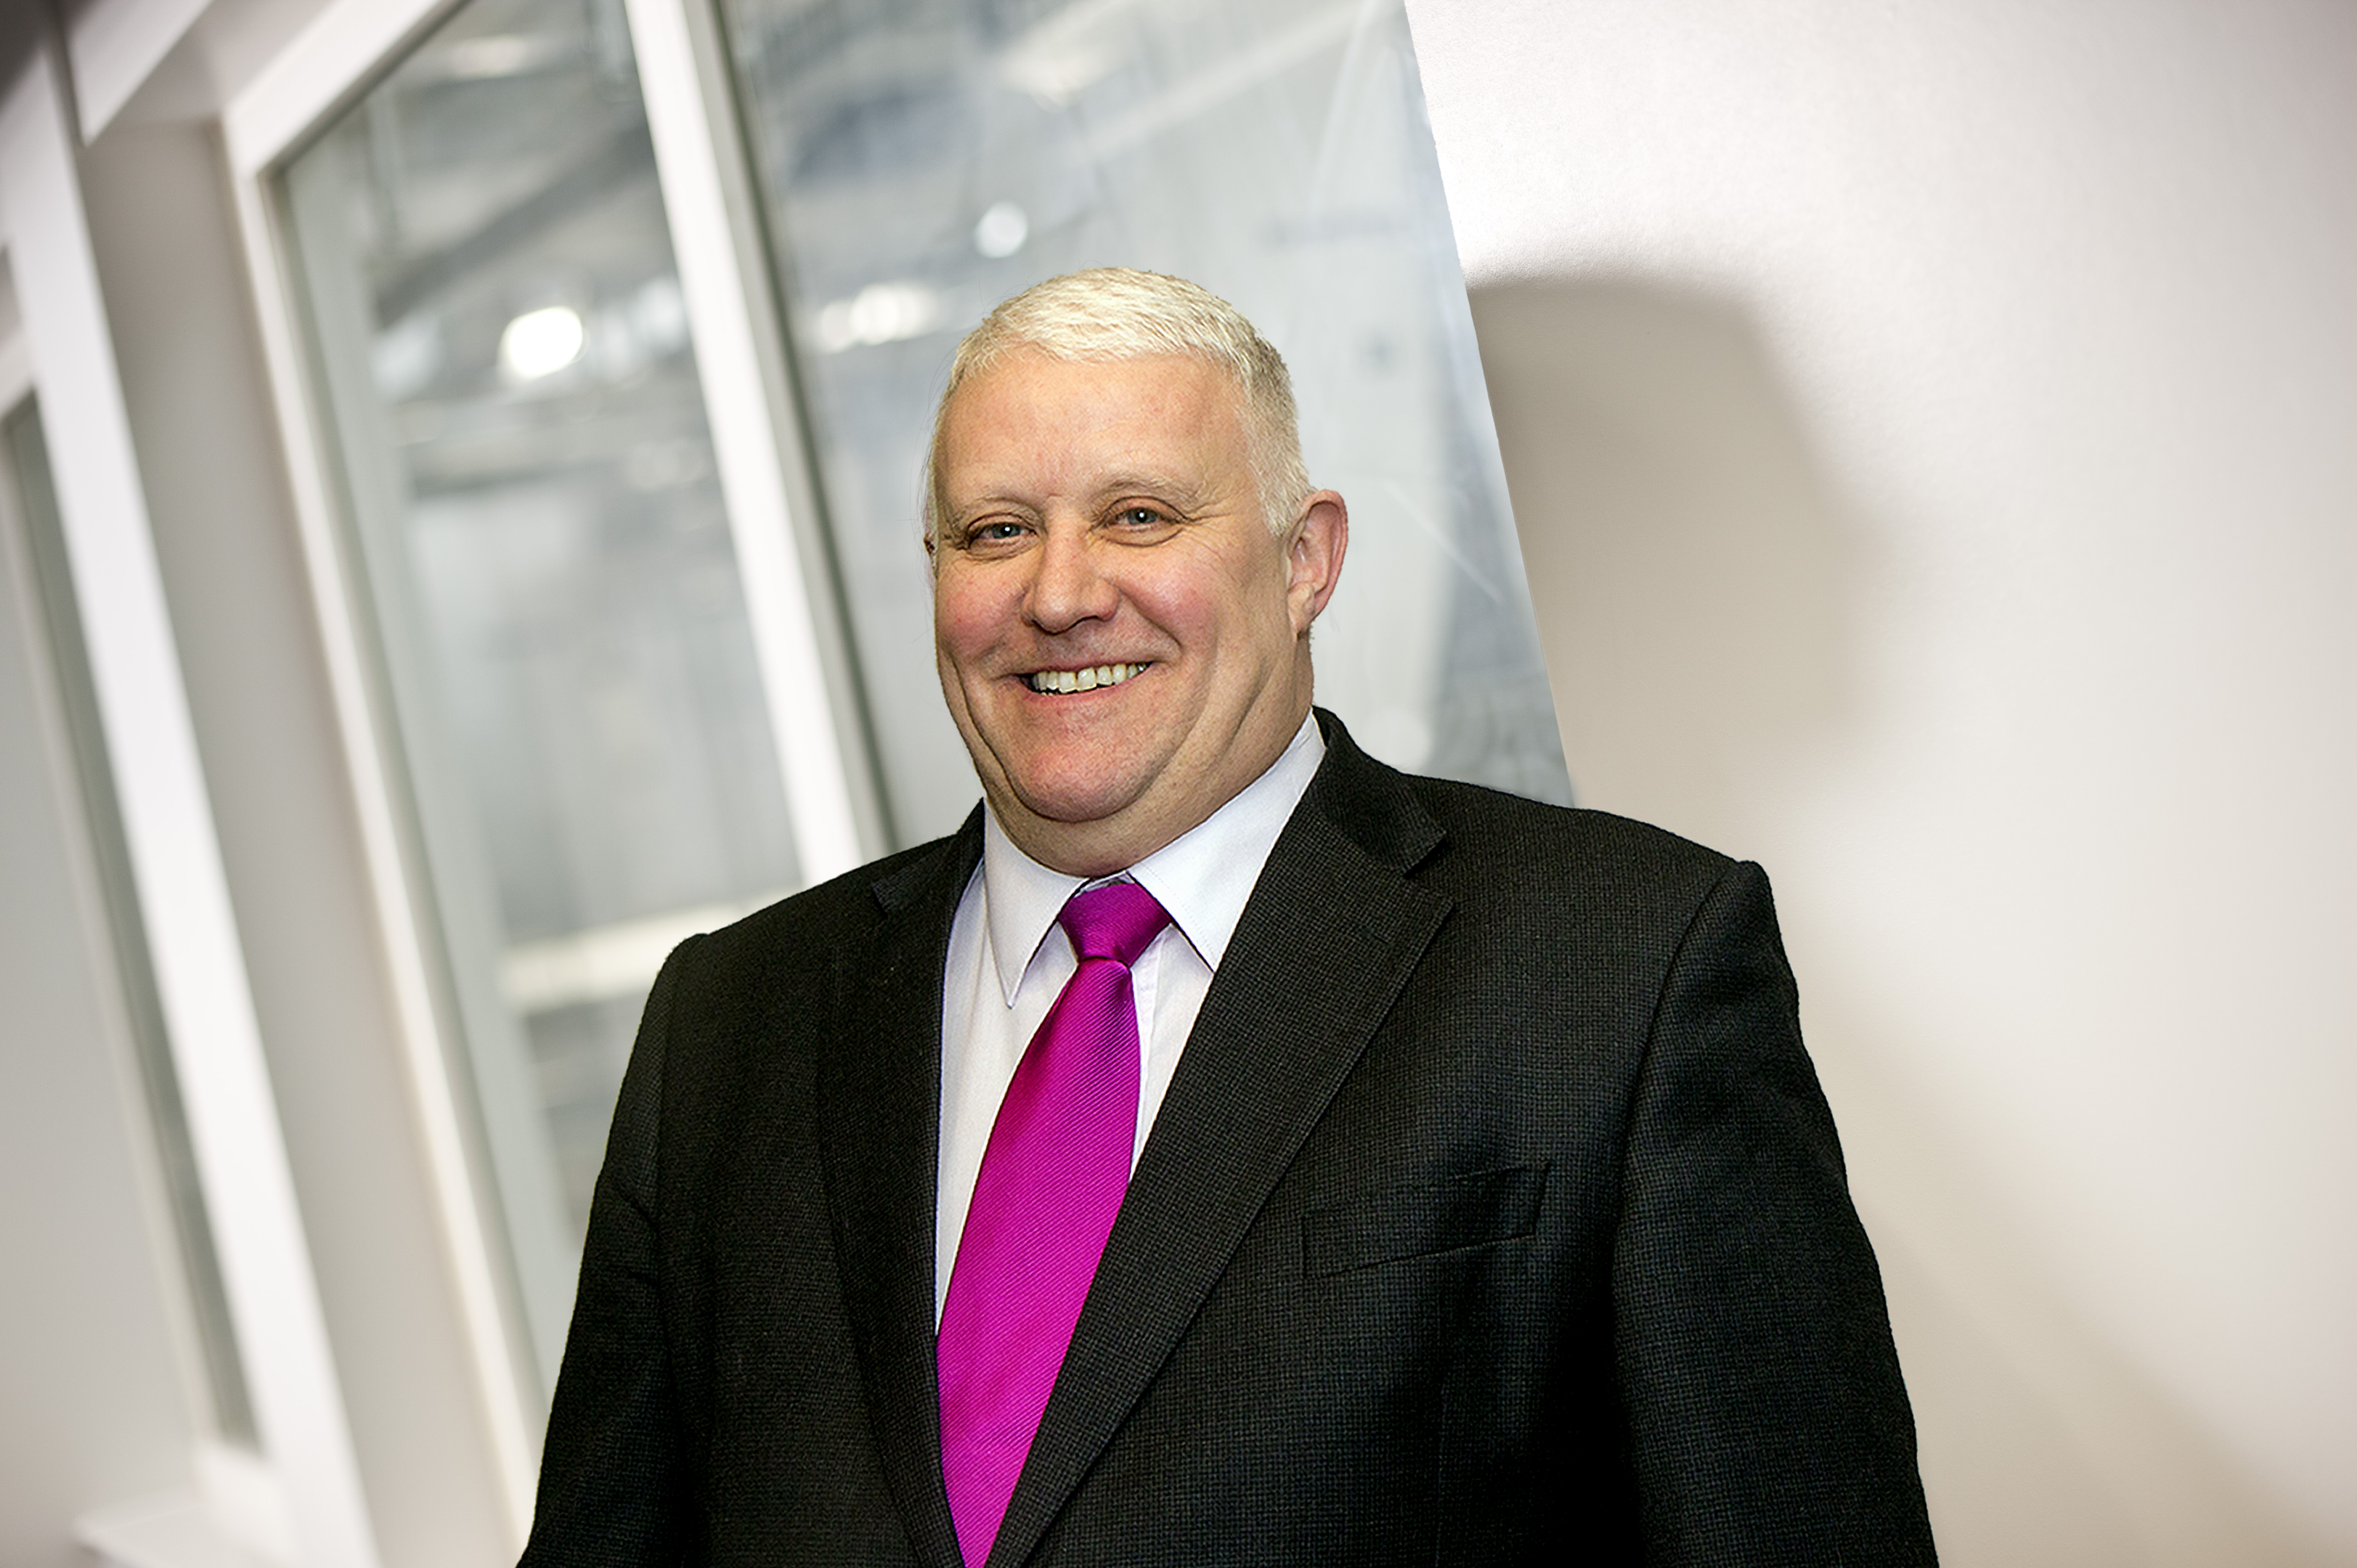 Steve Clarke appointed as Chief Commercial Officer for CLEAN - News - CLEAN Services